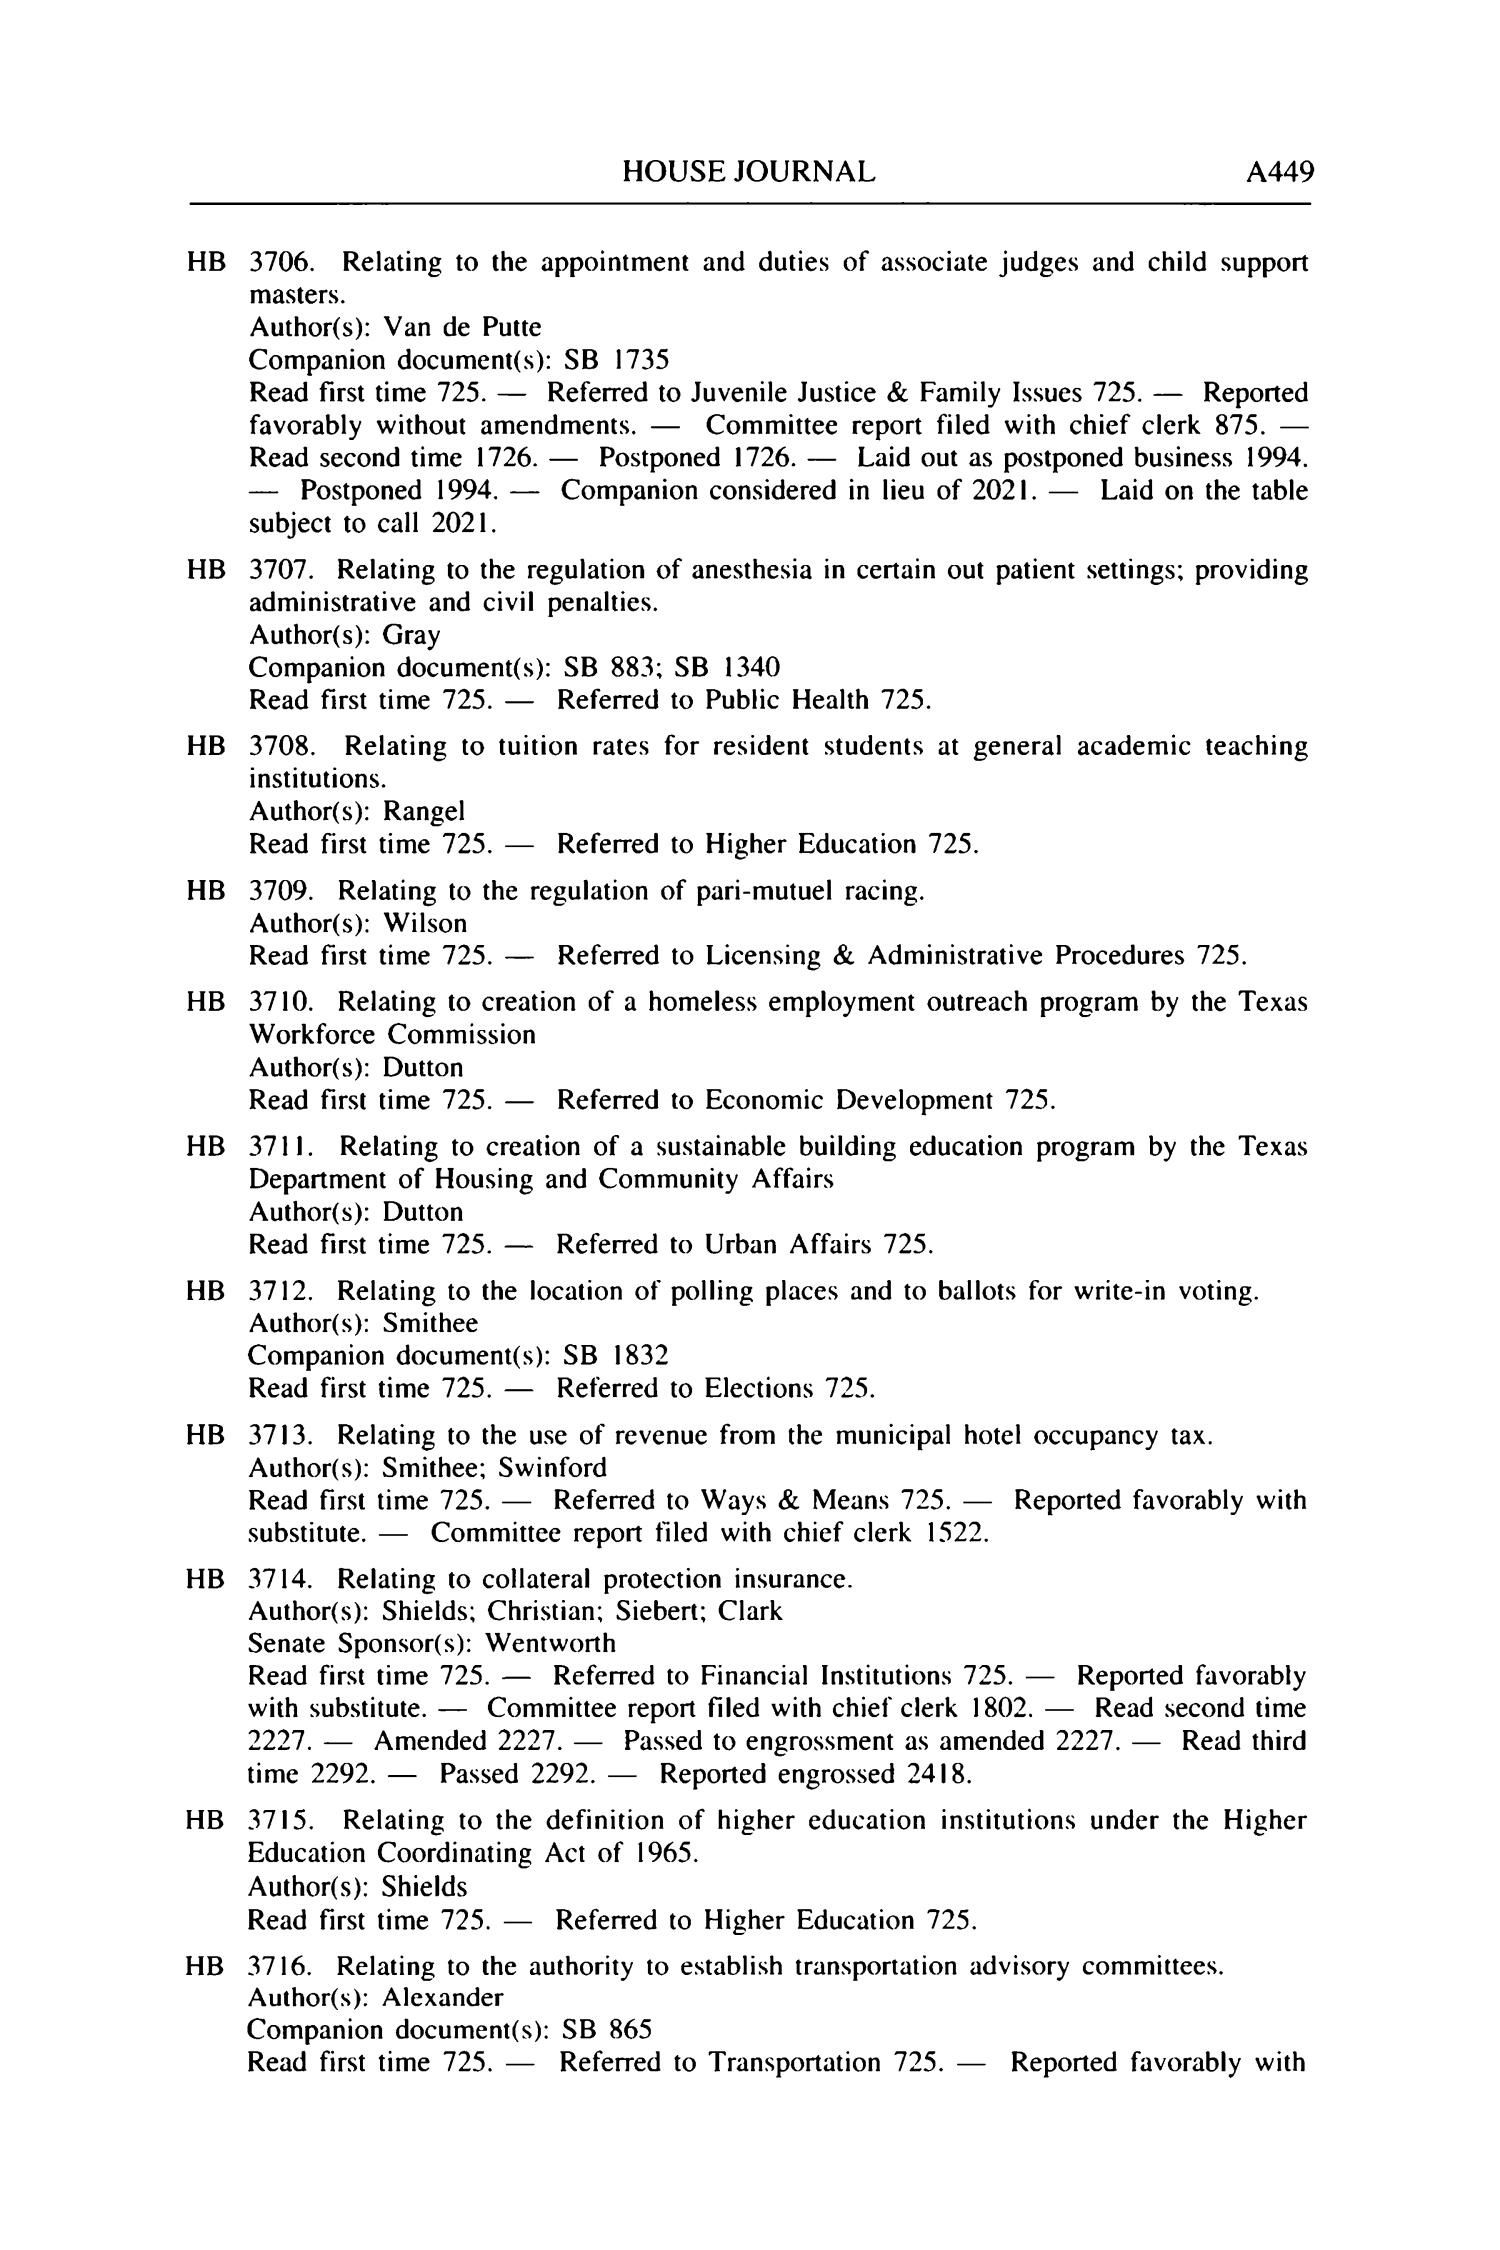 Journal of the House of Representatives of the Regular Session of the Seventy-Sixth Legislature of the State of Texas, Volume 5
                                                
                                                    A449
                                                